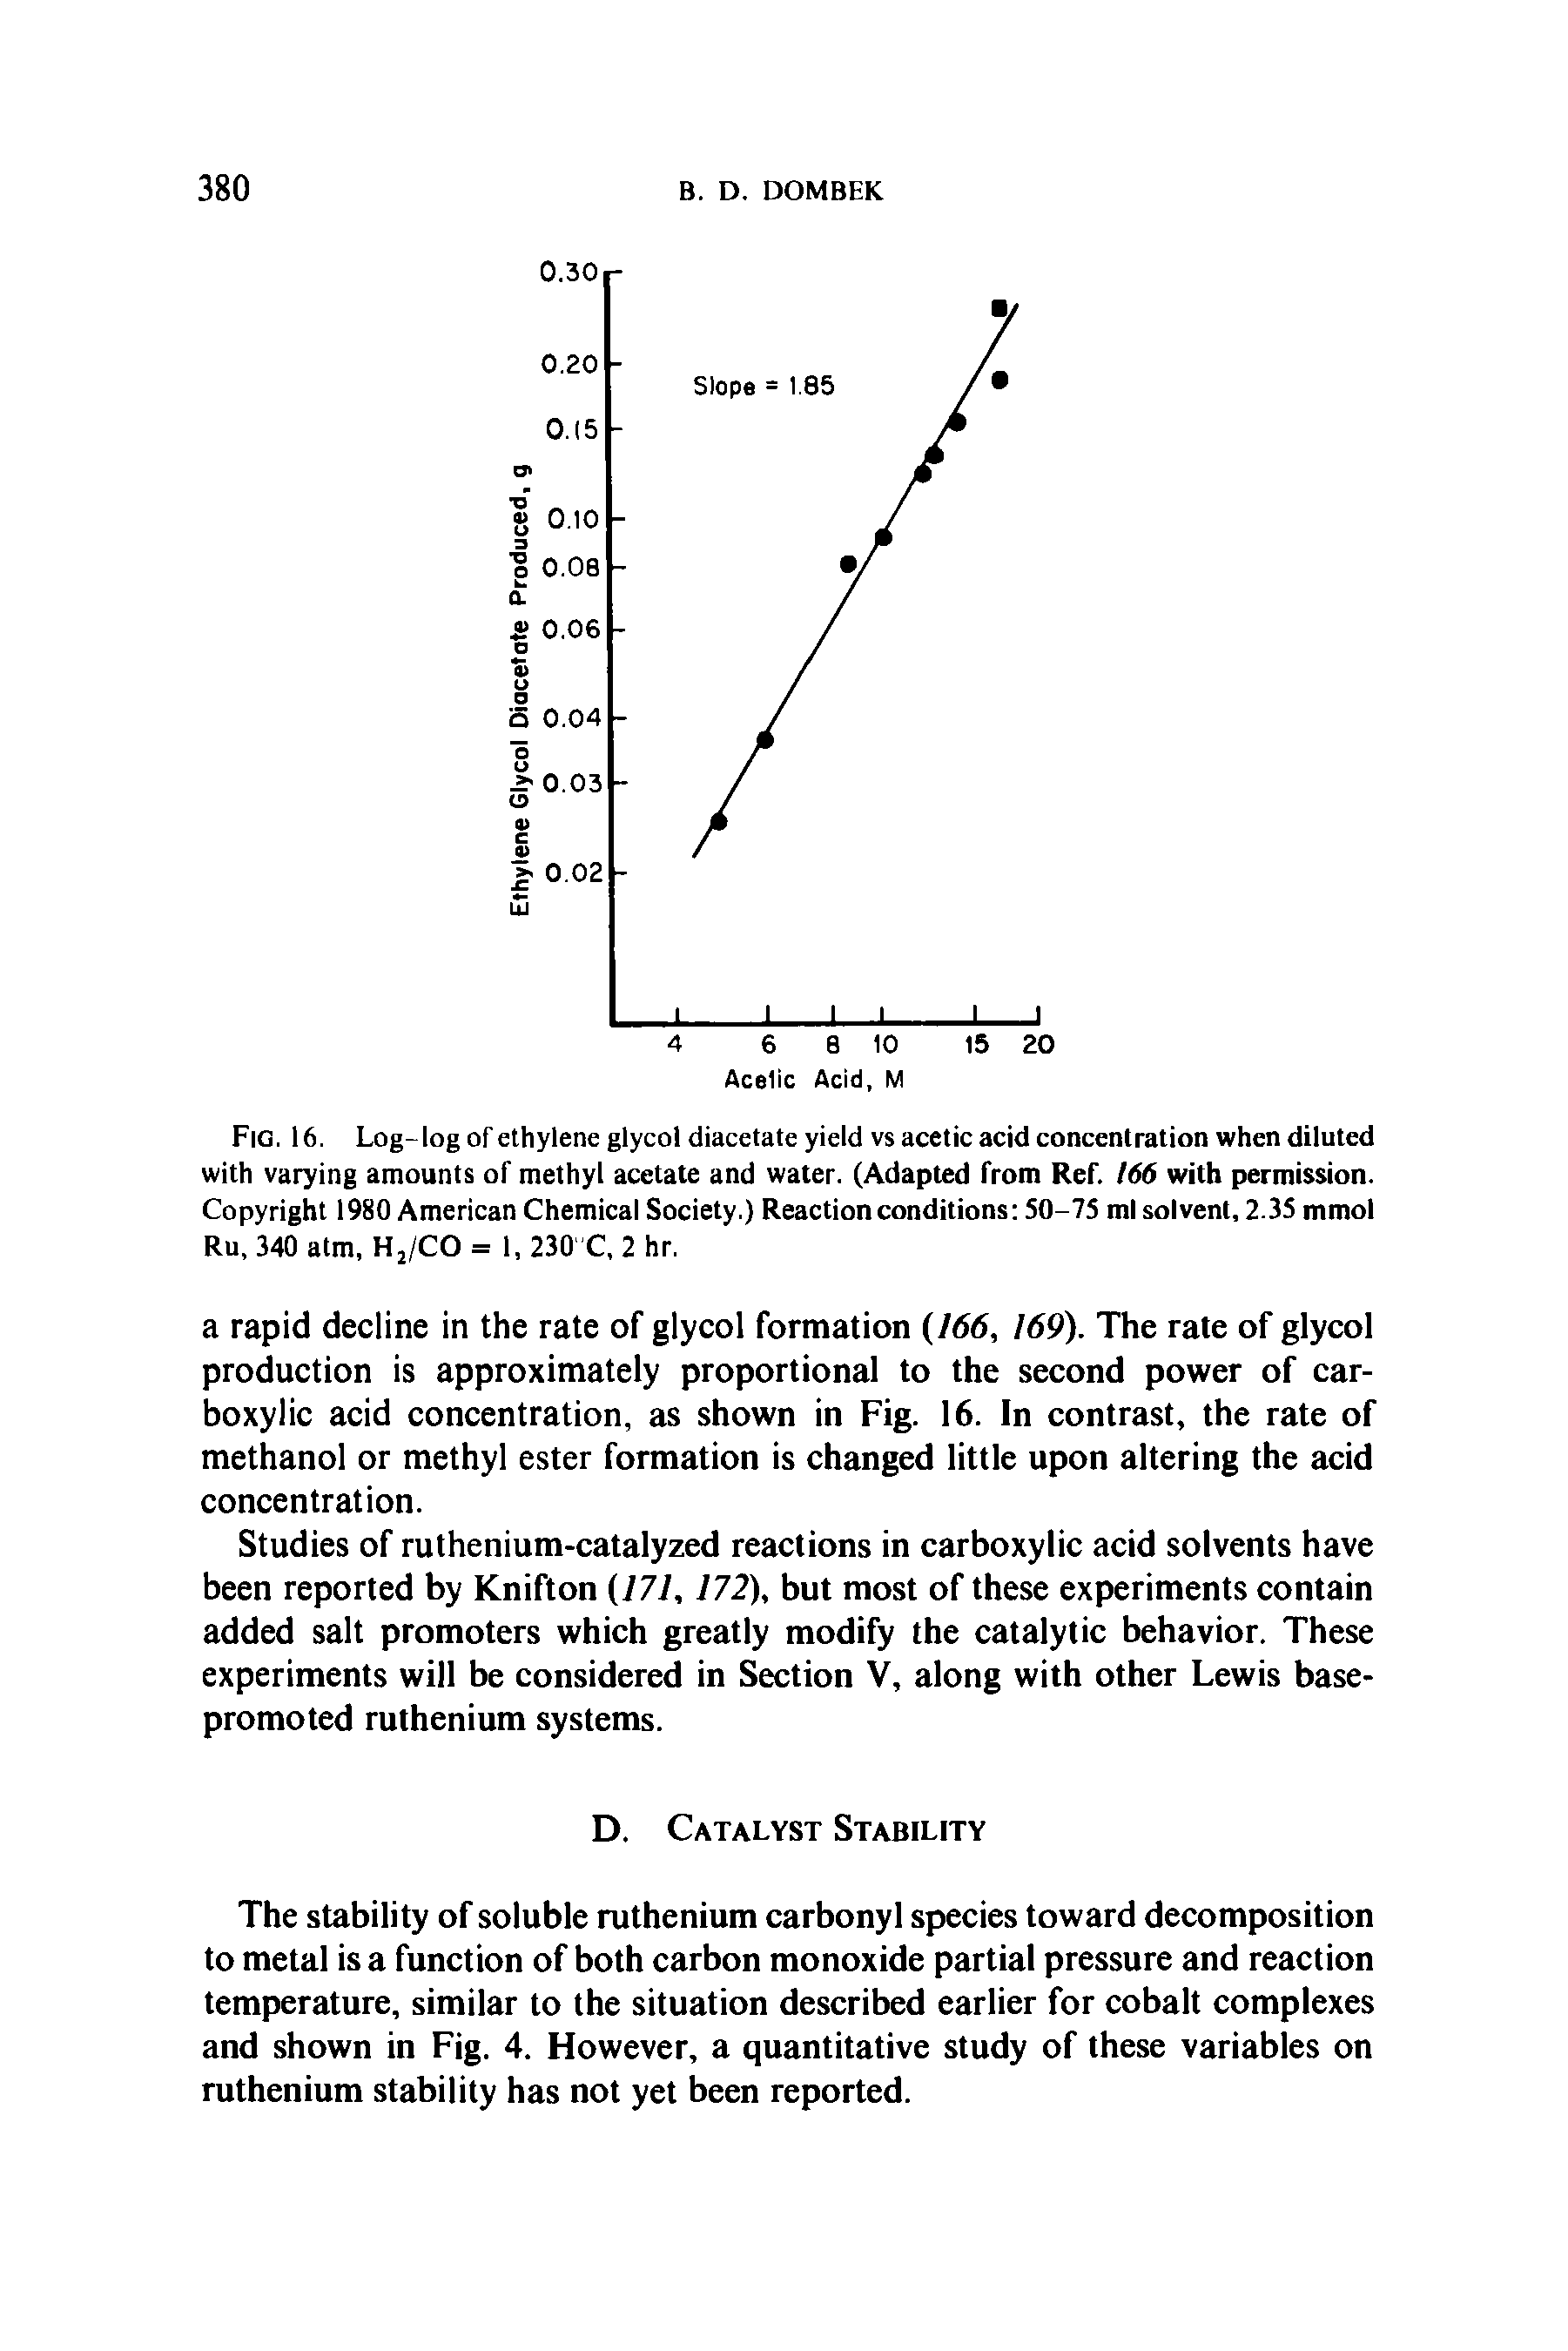 Fig. 16. Log-log of ethylene glycol diacetate yield vs acetic acid concentration when diluted with varying amounts of methyl acetate and water. (Adapted from Ref. 166 with permission. Copyright 1980 American Chemical Society.) Reaction conditions 50-75 ml solvent, 2.35 mmol Ru, 340 atm, H2/CO = 1, 230 C, 2 hr.